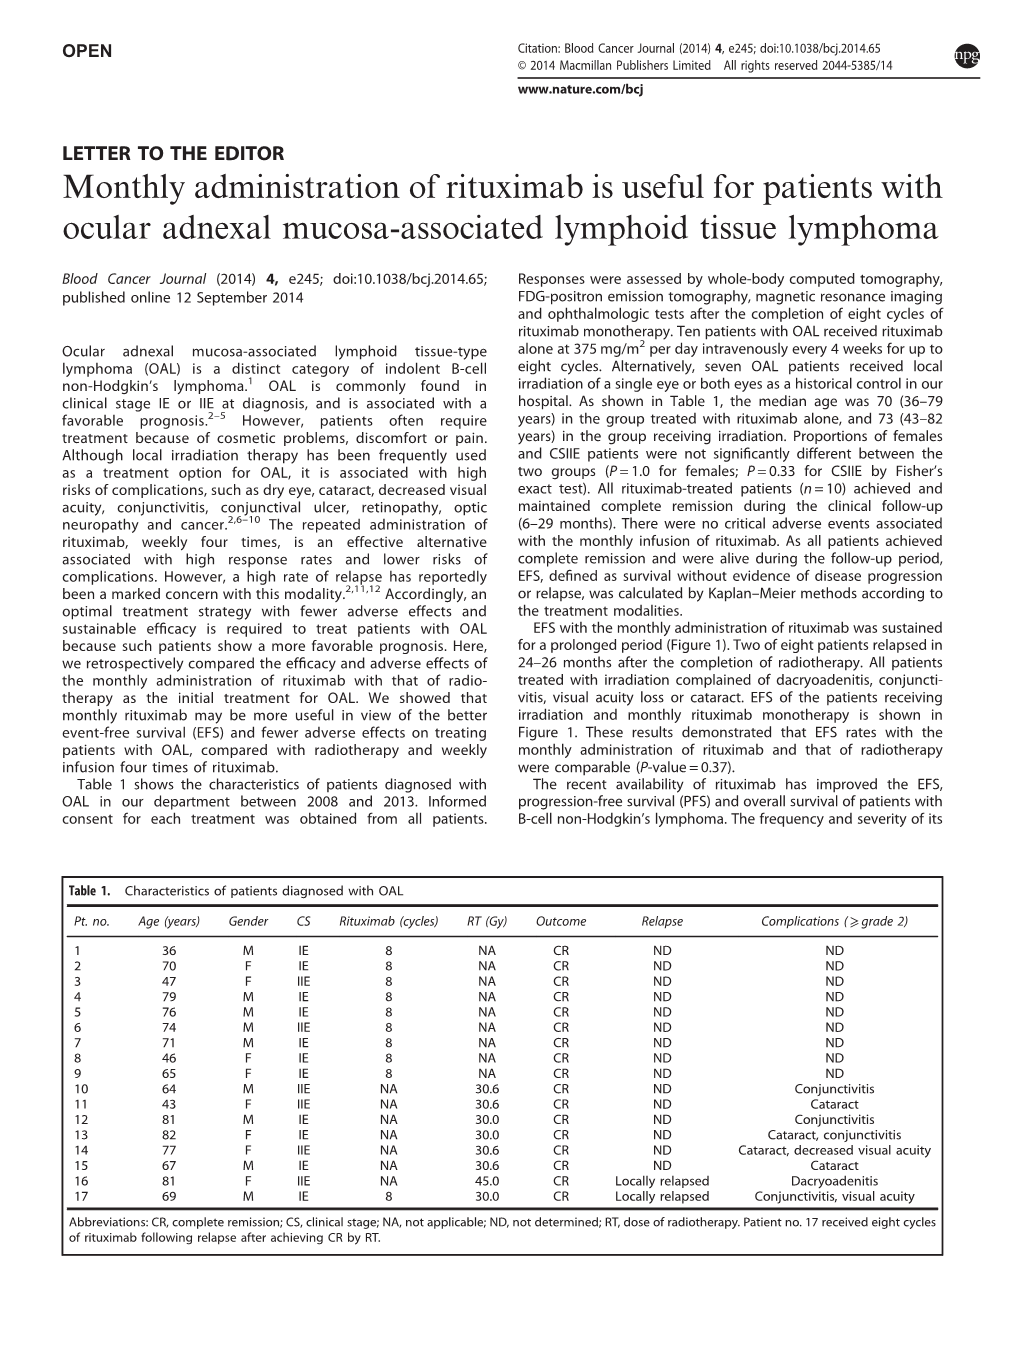 Monthly Administration of Rituximab Is Useful for Patients with Ocular Adnexal Mucosa-Associated Lymphoid Tissue Lymphoma